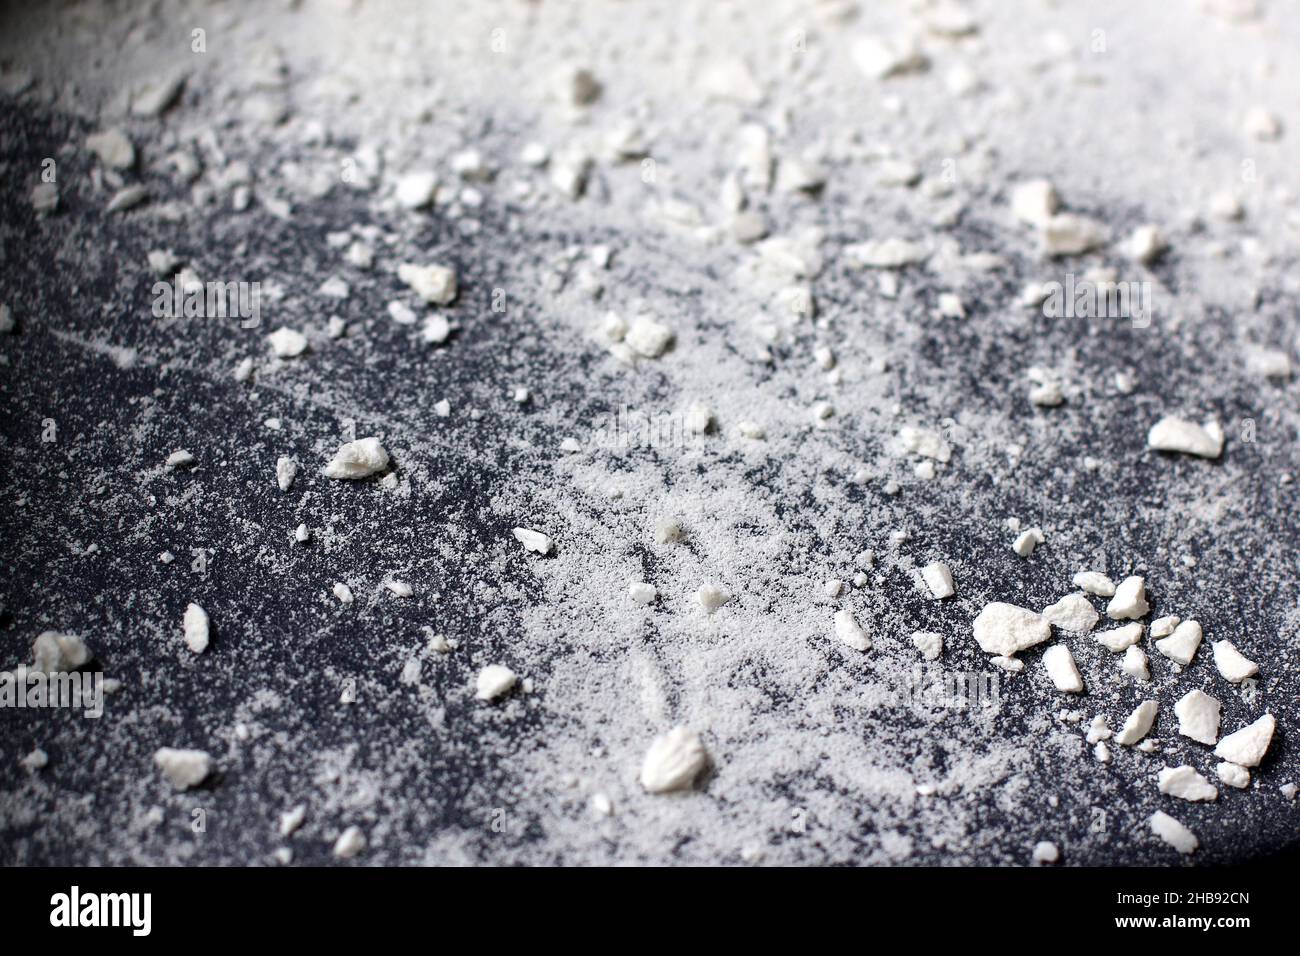 White dust. White powder. Scattering white particles. Abstract background Stock Photo